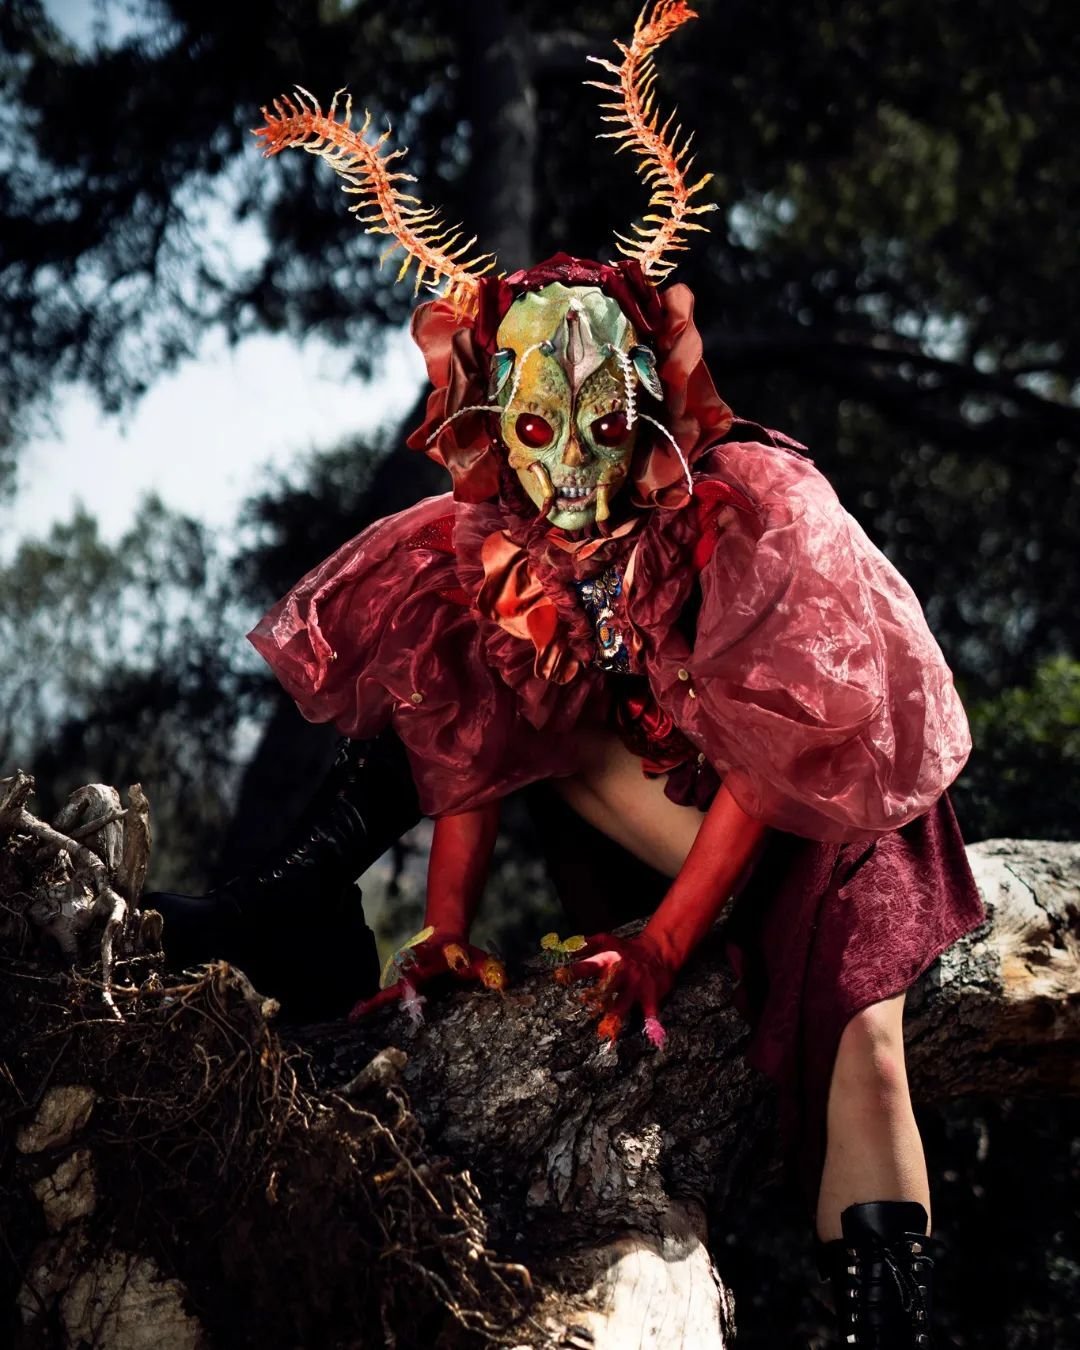 Finally I can show you my latest collaboration with incredible team inspired by insects and grotesque beauty.THE BEAUTY IN THE GROTESQUEPhotography and costume- Paola Idrontino -  (3).jpg